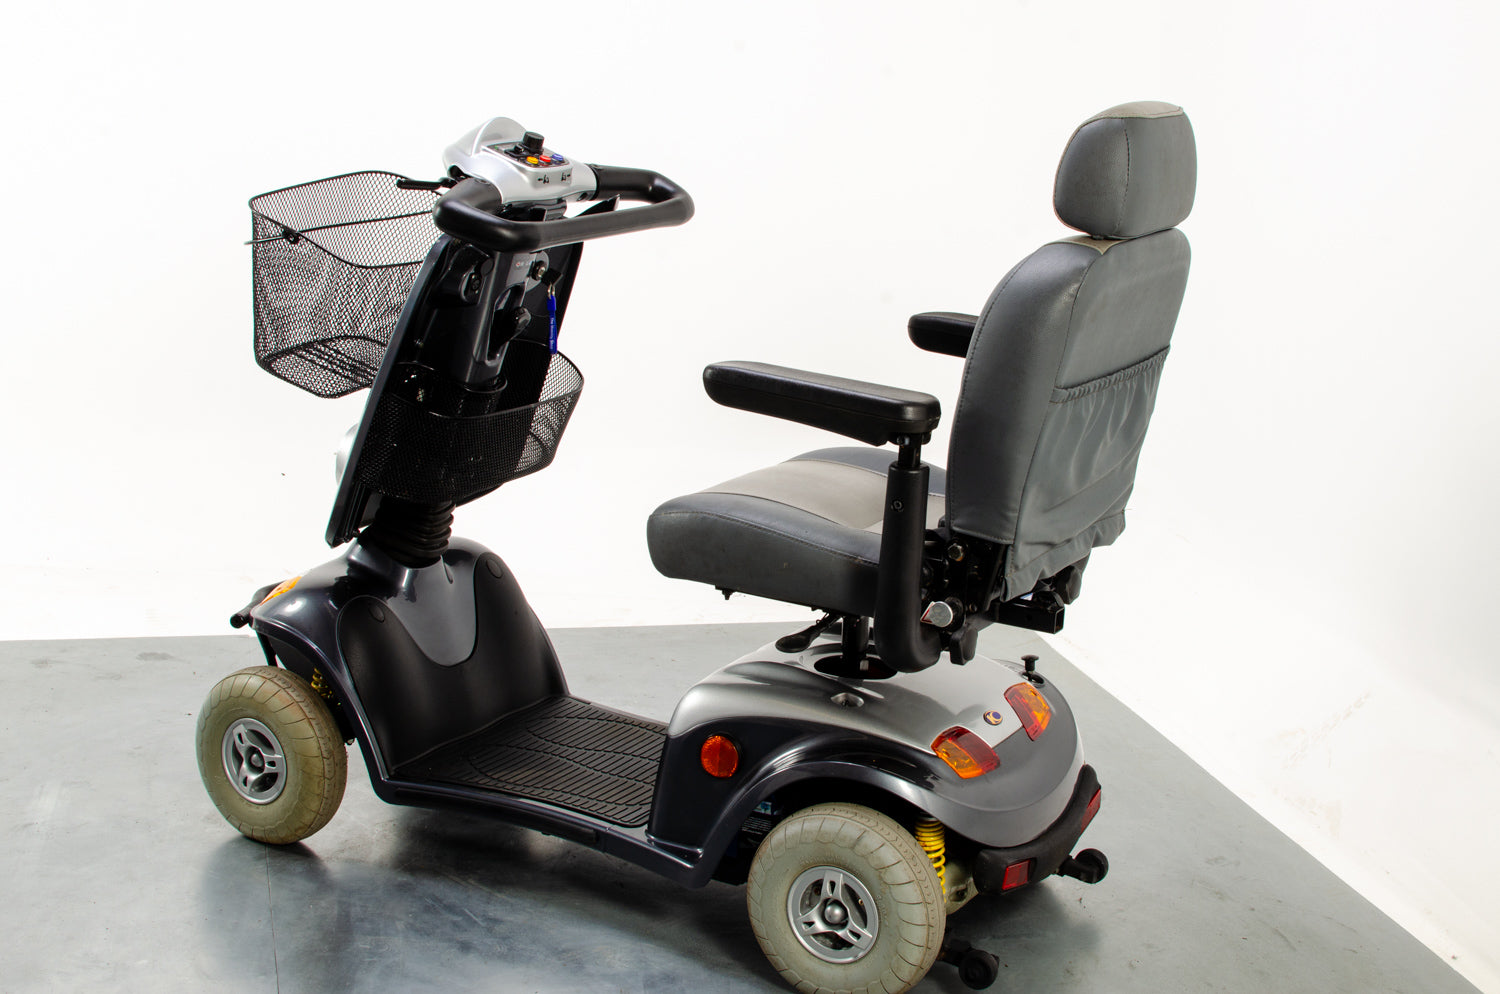 Kymco Midi XLS 8mph Used Mobility Scooter Road Pavement Suspension Pneumatic Tyres